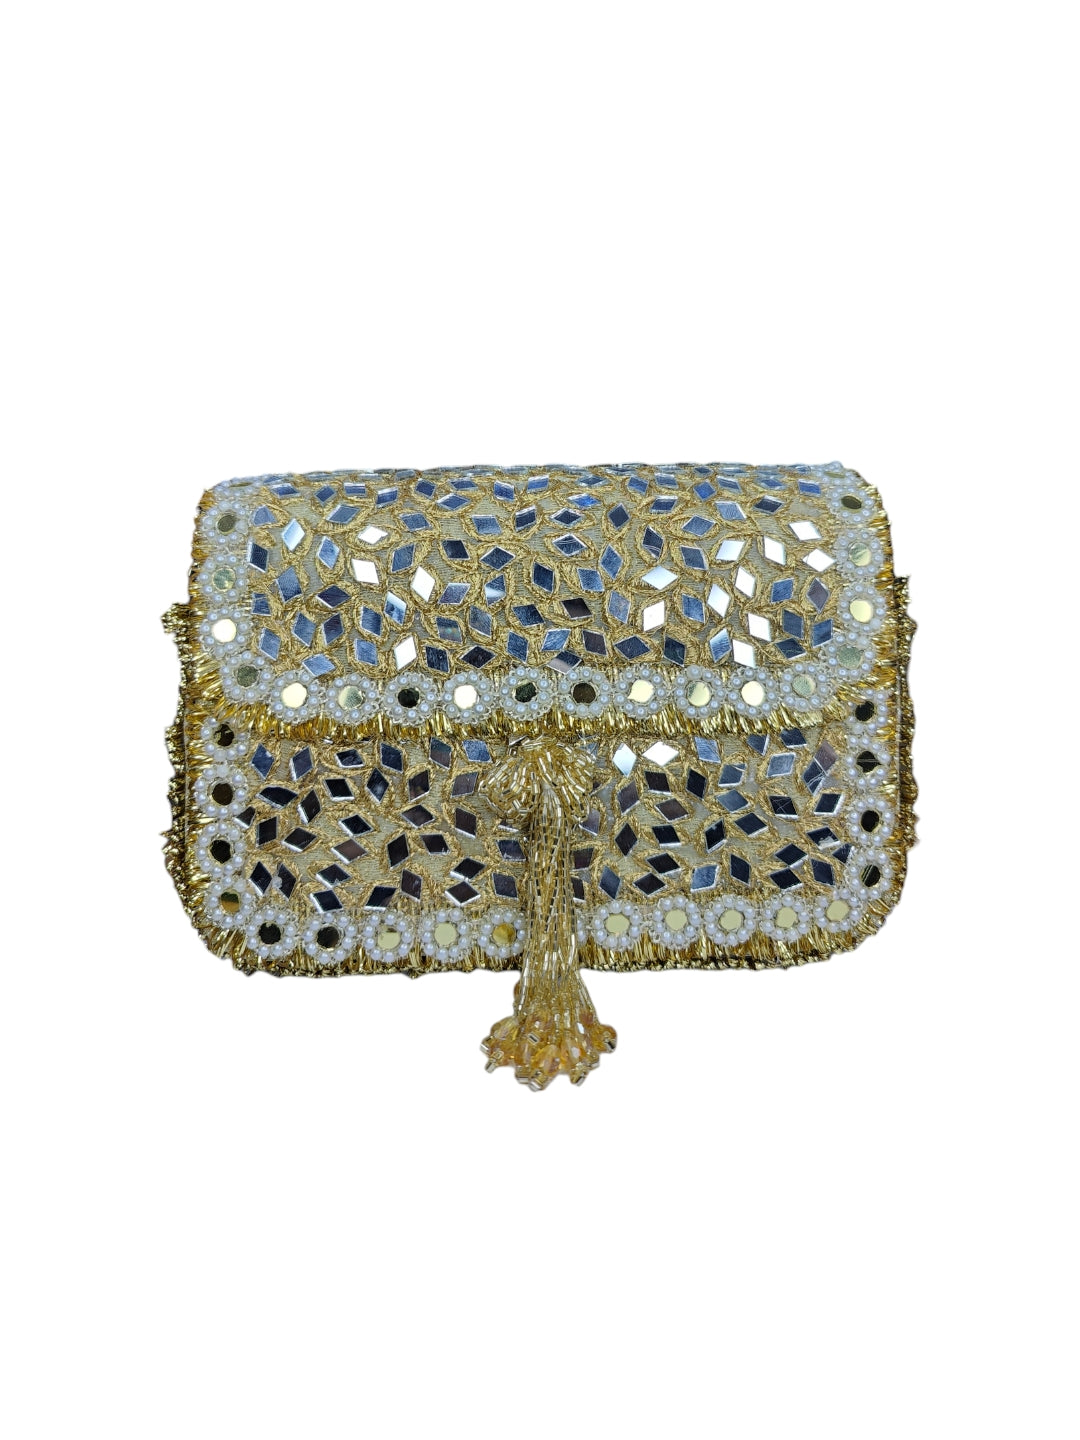 Flaunt your style with this statement accessory that captures the essence of timeless beauty and artisanal finesse.